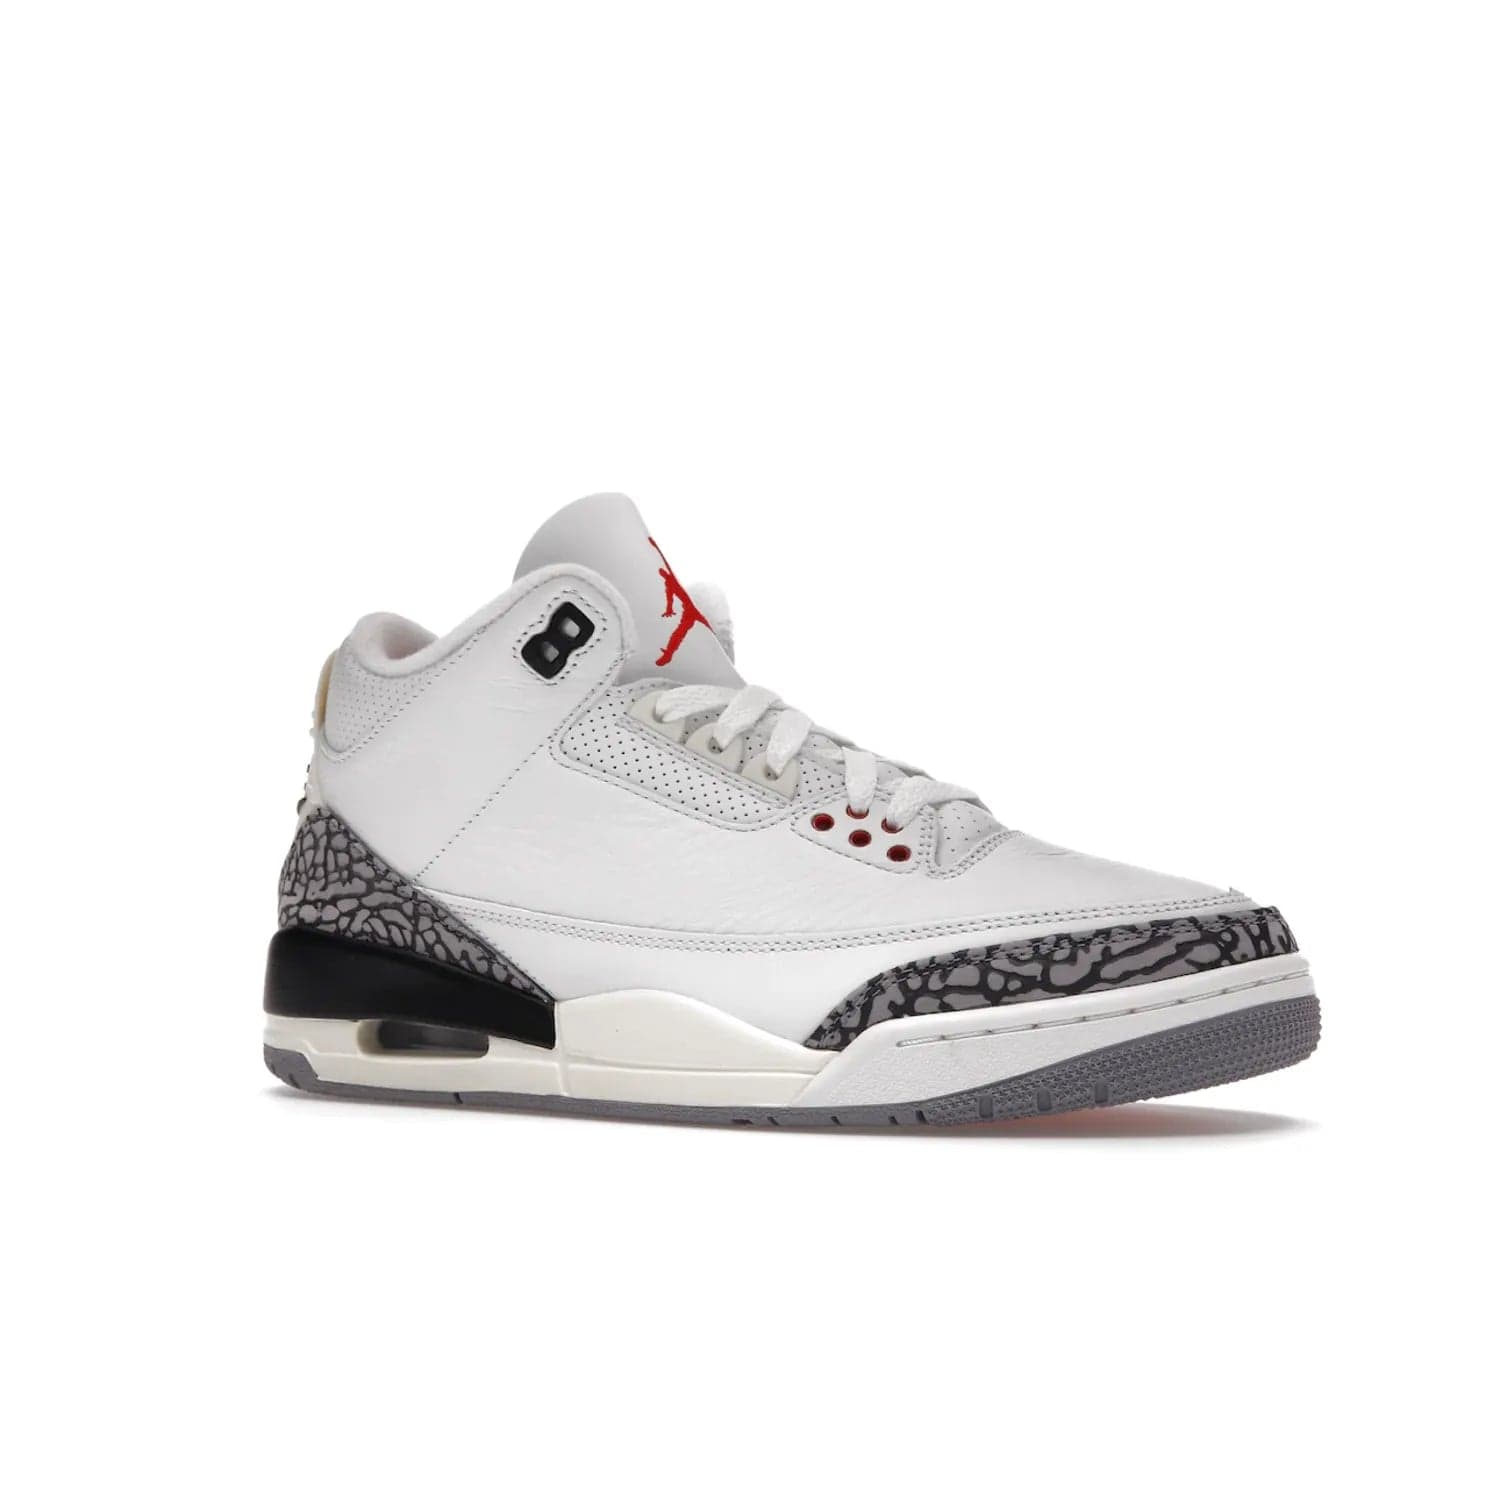 Jordan 3 Retro White Cement Reimagined - Image 4 - Only at www.BallersClubKickz.com - The Reimagined Air Jordan 3 Retro in a Summit White/Fire Red/Black/Cement Grey colorway is launching on March 11, 2023. Featuring a white leather upper, off-white midsoles and heel tabs, this vintage-look sneaker is a must-have.